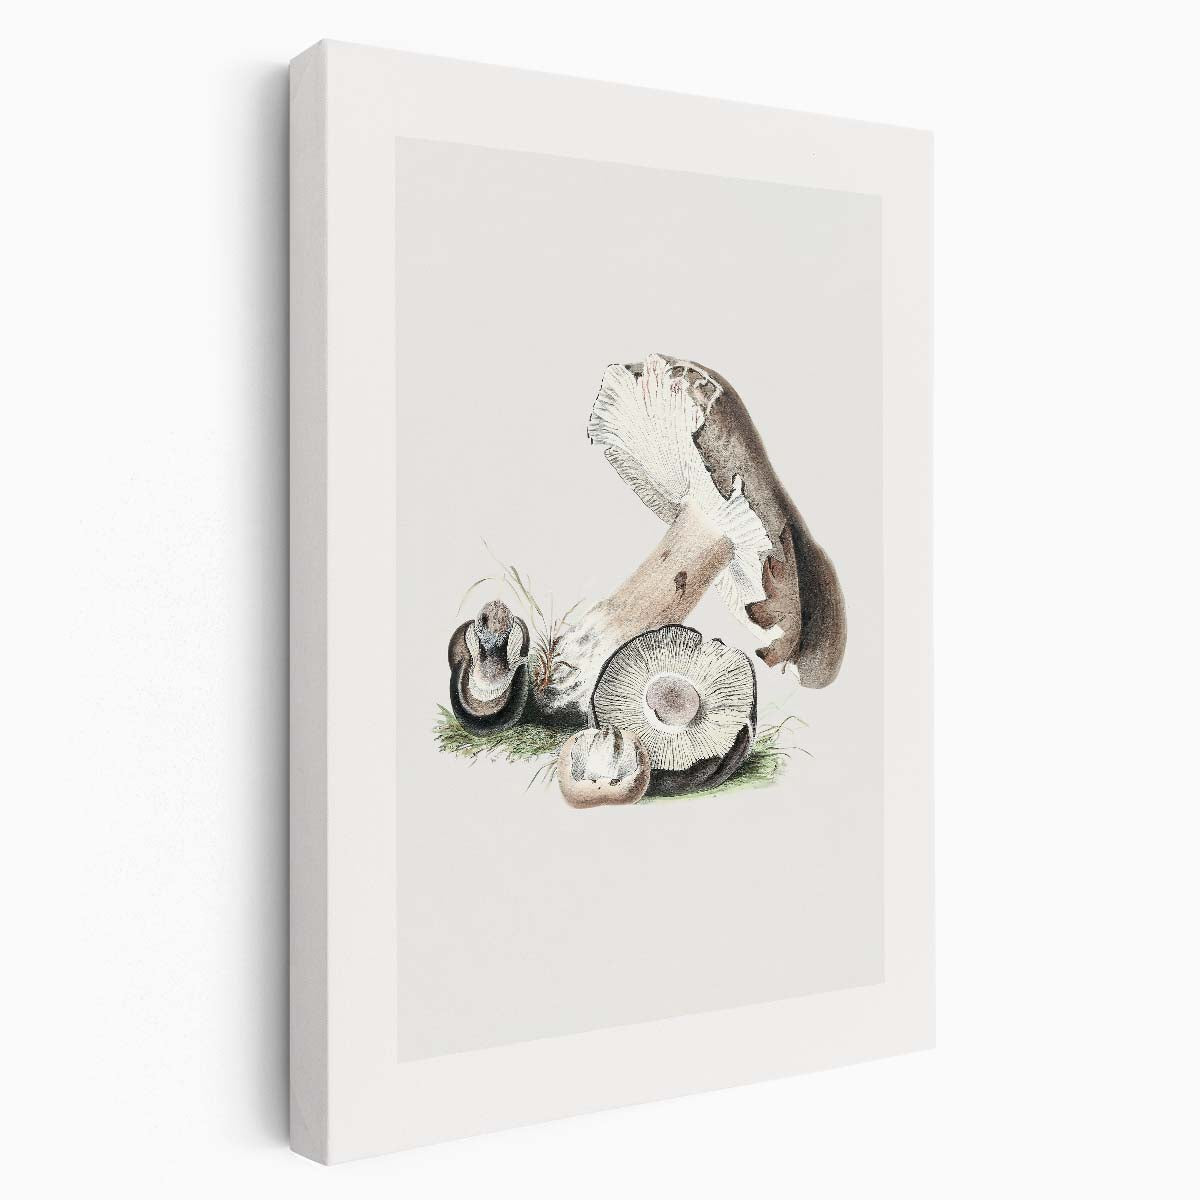 Vintage Agaricus Augustus Mushroom Illustration Wall Art by Luxuriance Designs, made in USA